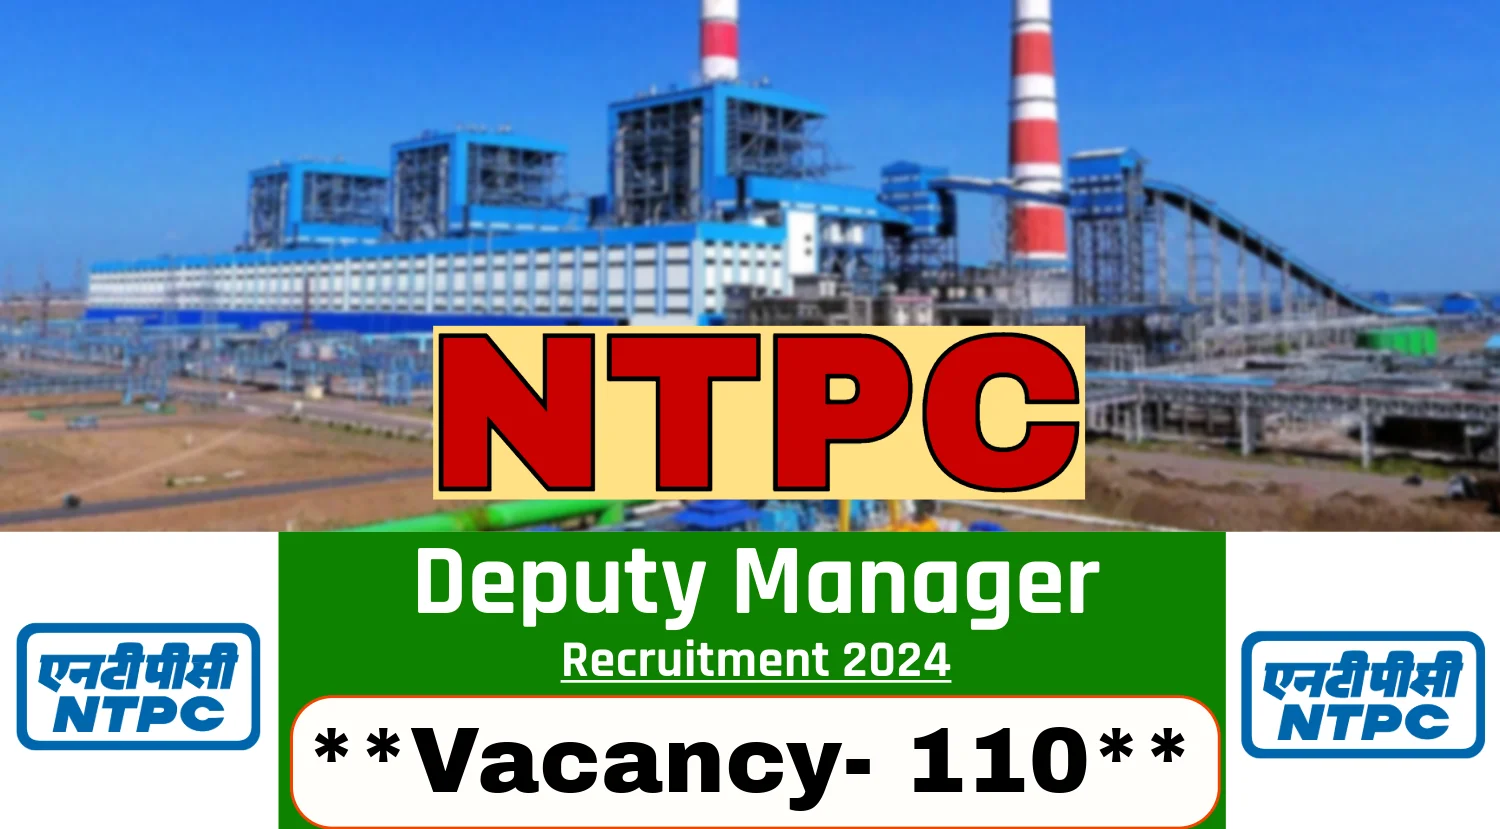 NTPC Deputy Manager Recruitment 2024 Notification Out,